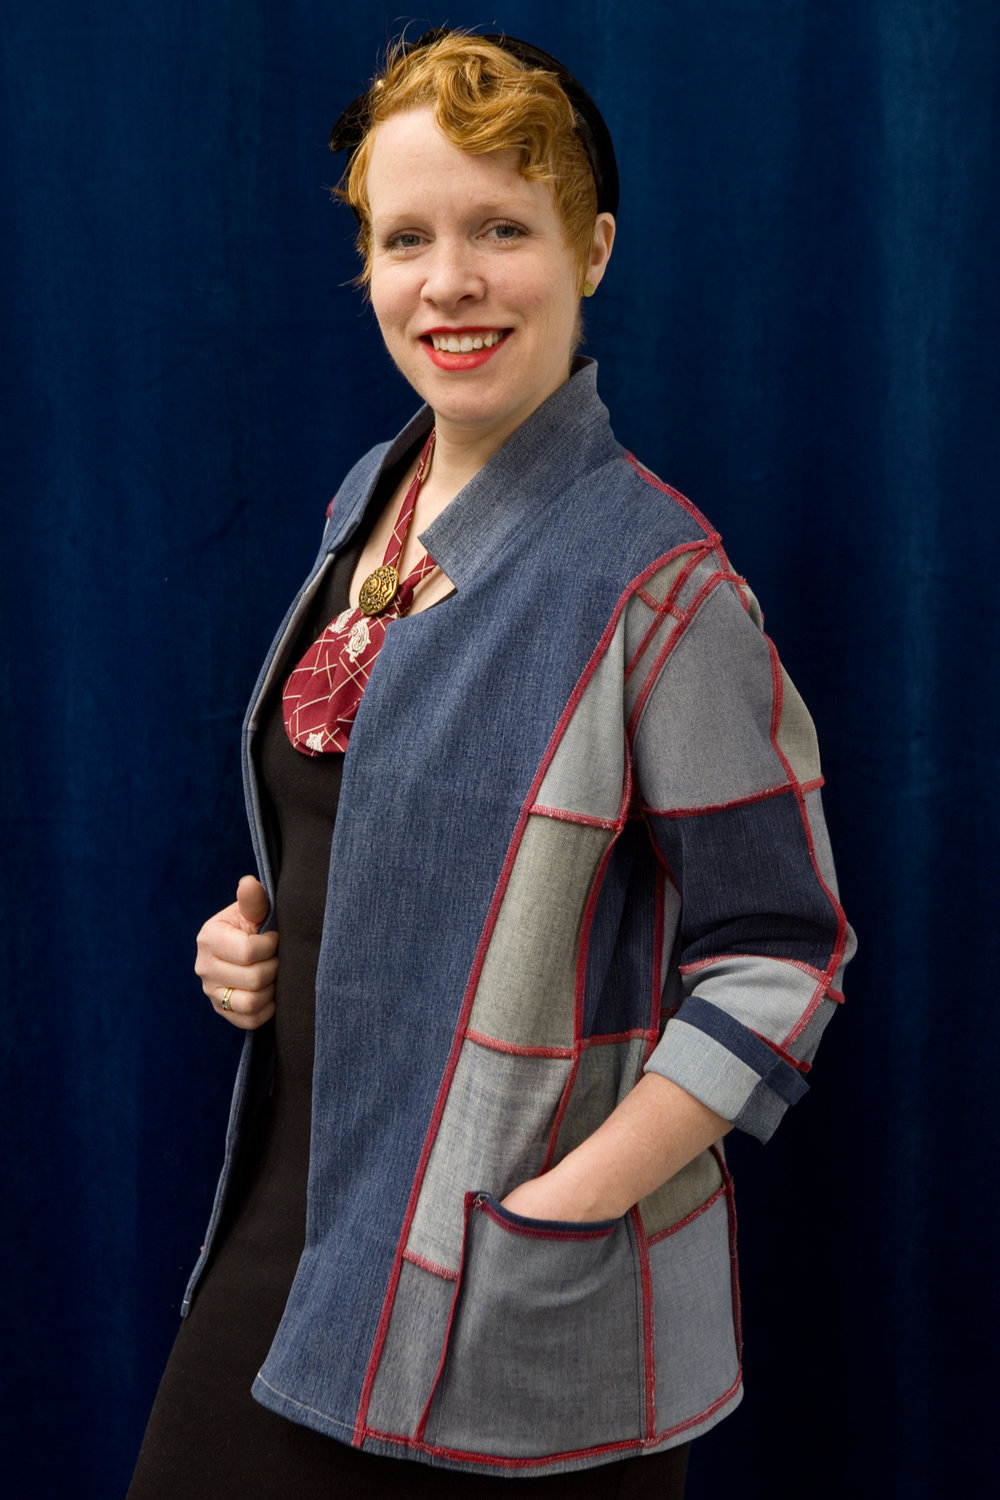 RETHINK owner Kristen McCoy in an upcycled denim blazer. She explained, “To upcycle is to add value to something in the processing. We’re able to take a worn garment and turn it into something new. We take jeans that are no longer wearable and cut them into denim squares. The result is a reversible blazer that still has a lot of wear. It’s on sale at the shop, and is size fluid (small to large).”  (Photos by Margie O’Loughlin)